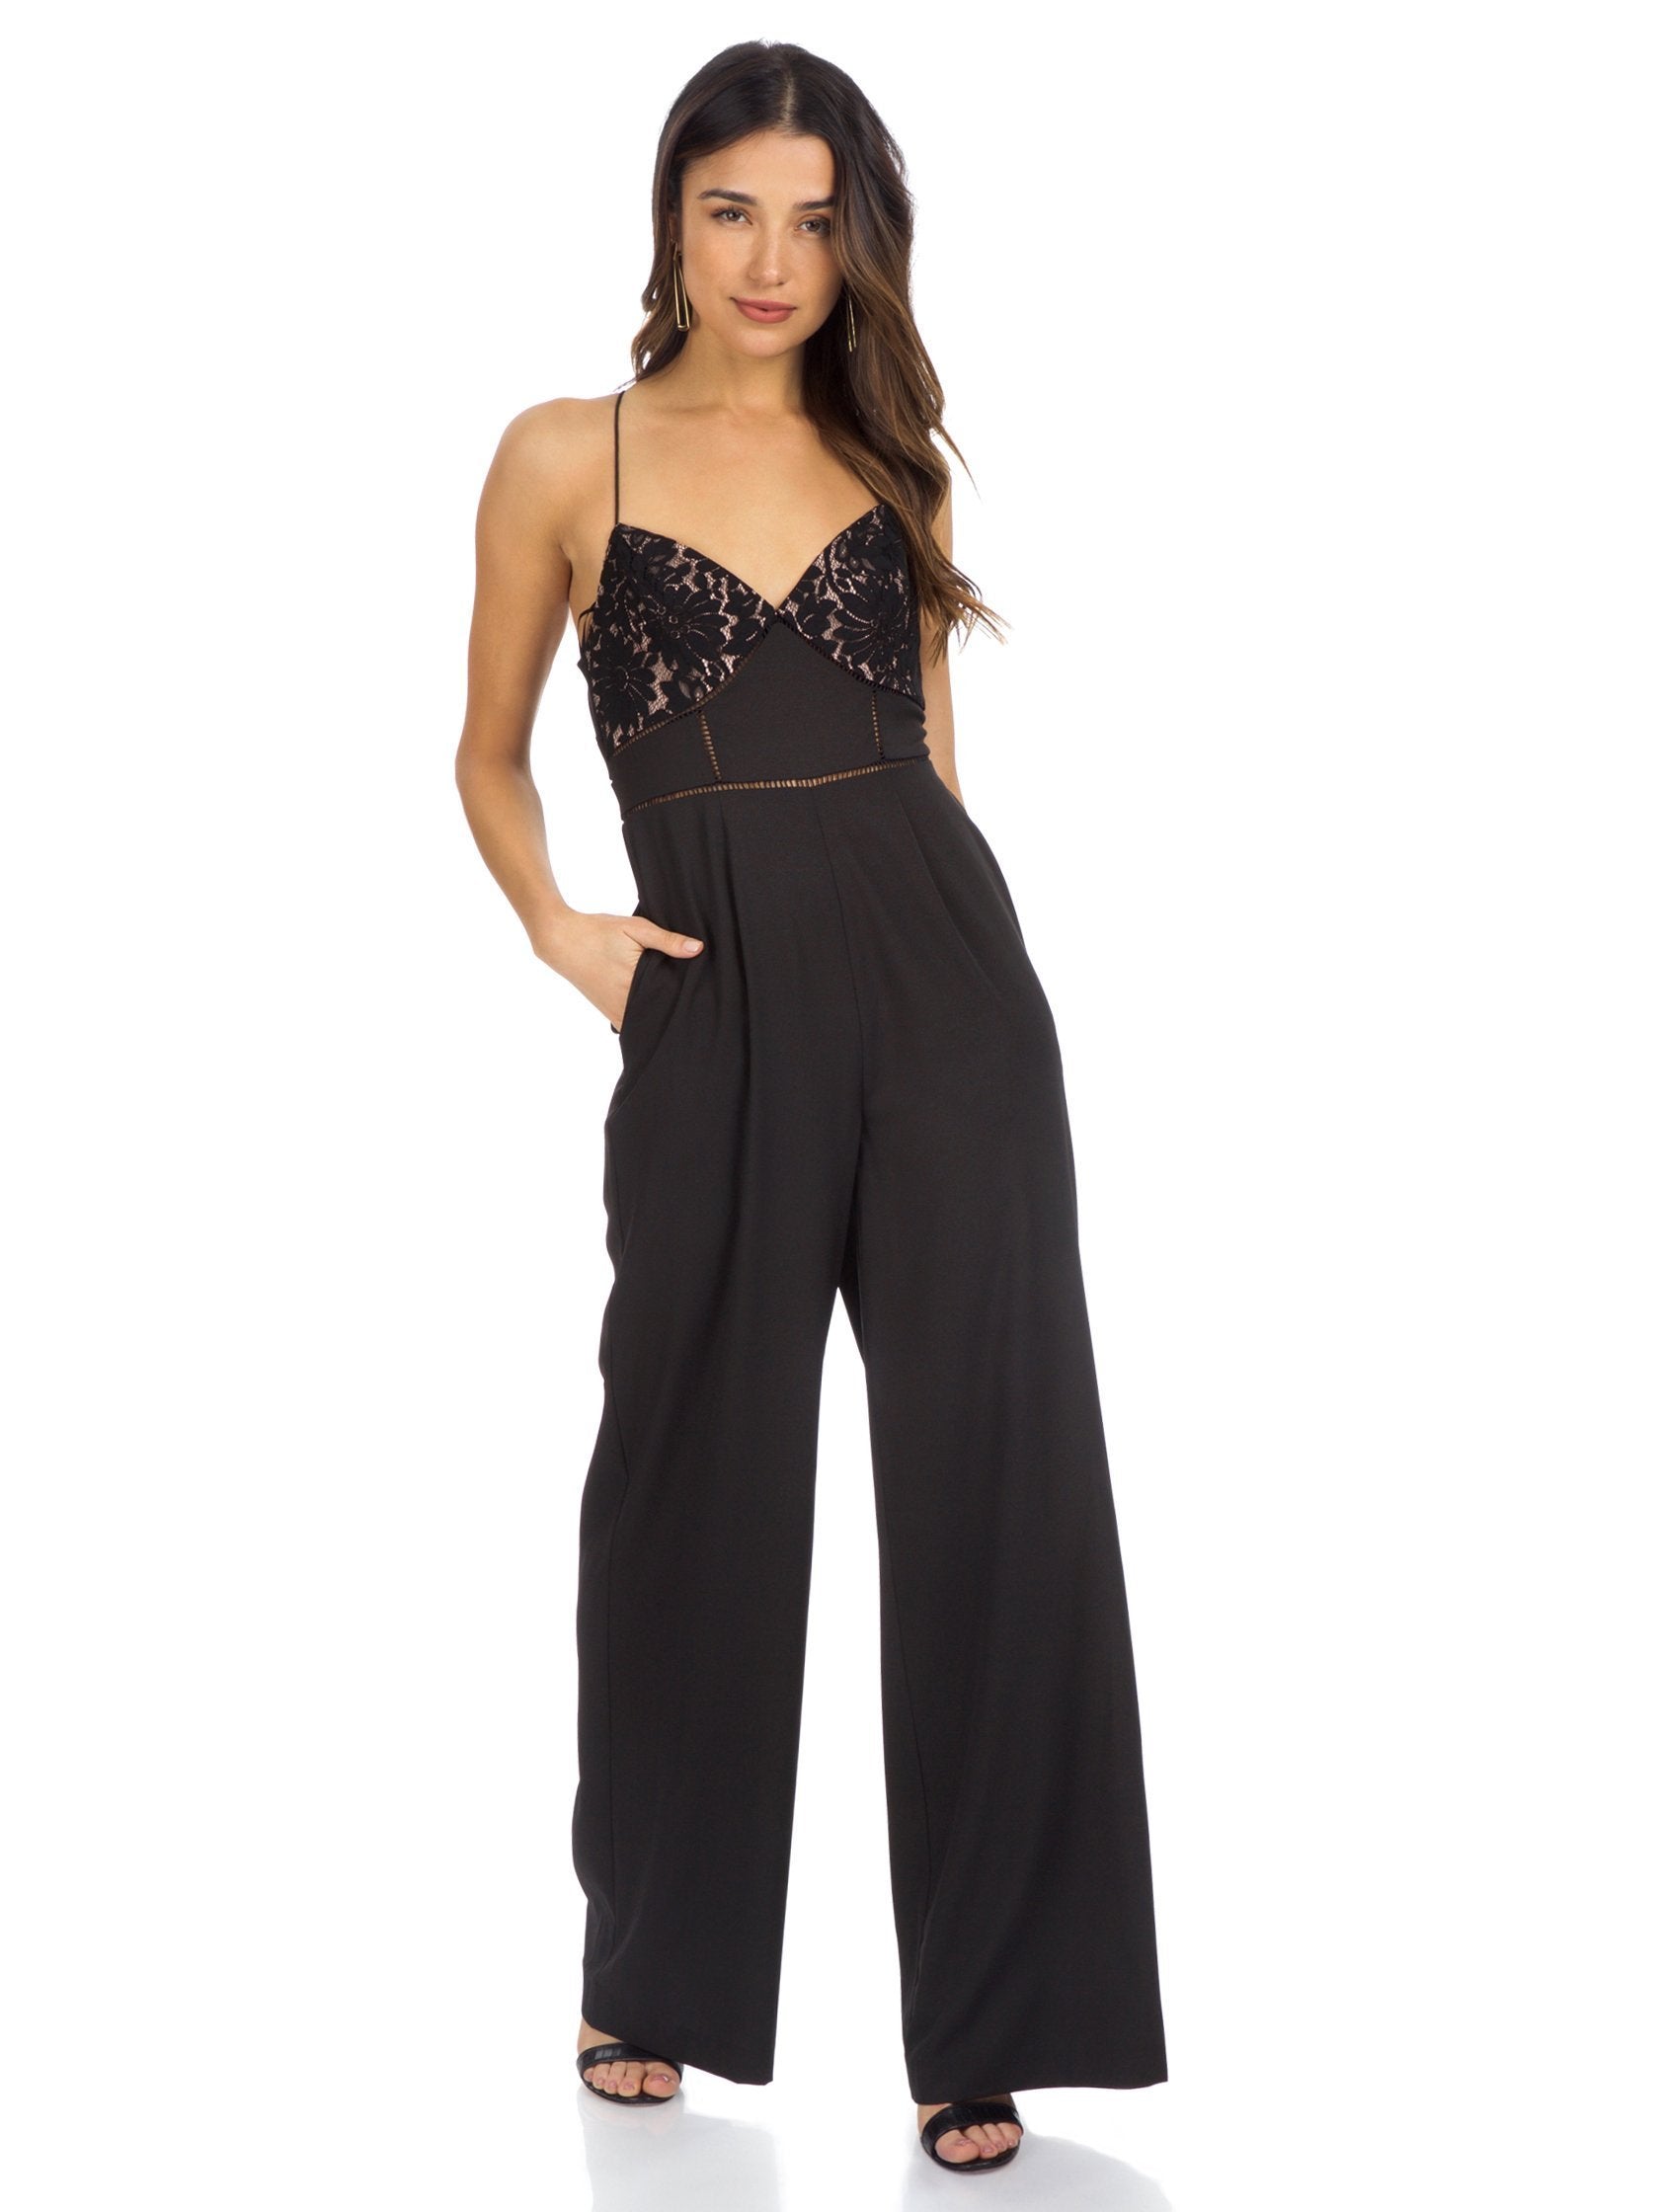 Girl outfit in a jumpsuit rental from YUMI KIM called Light My Fire Jumpsuit